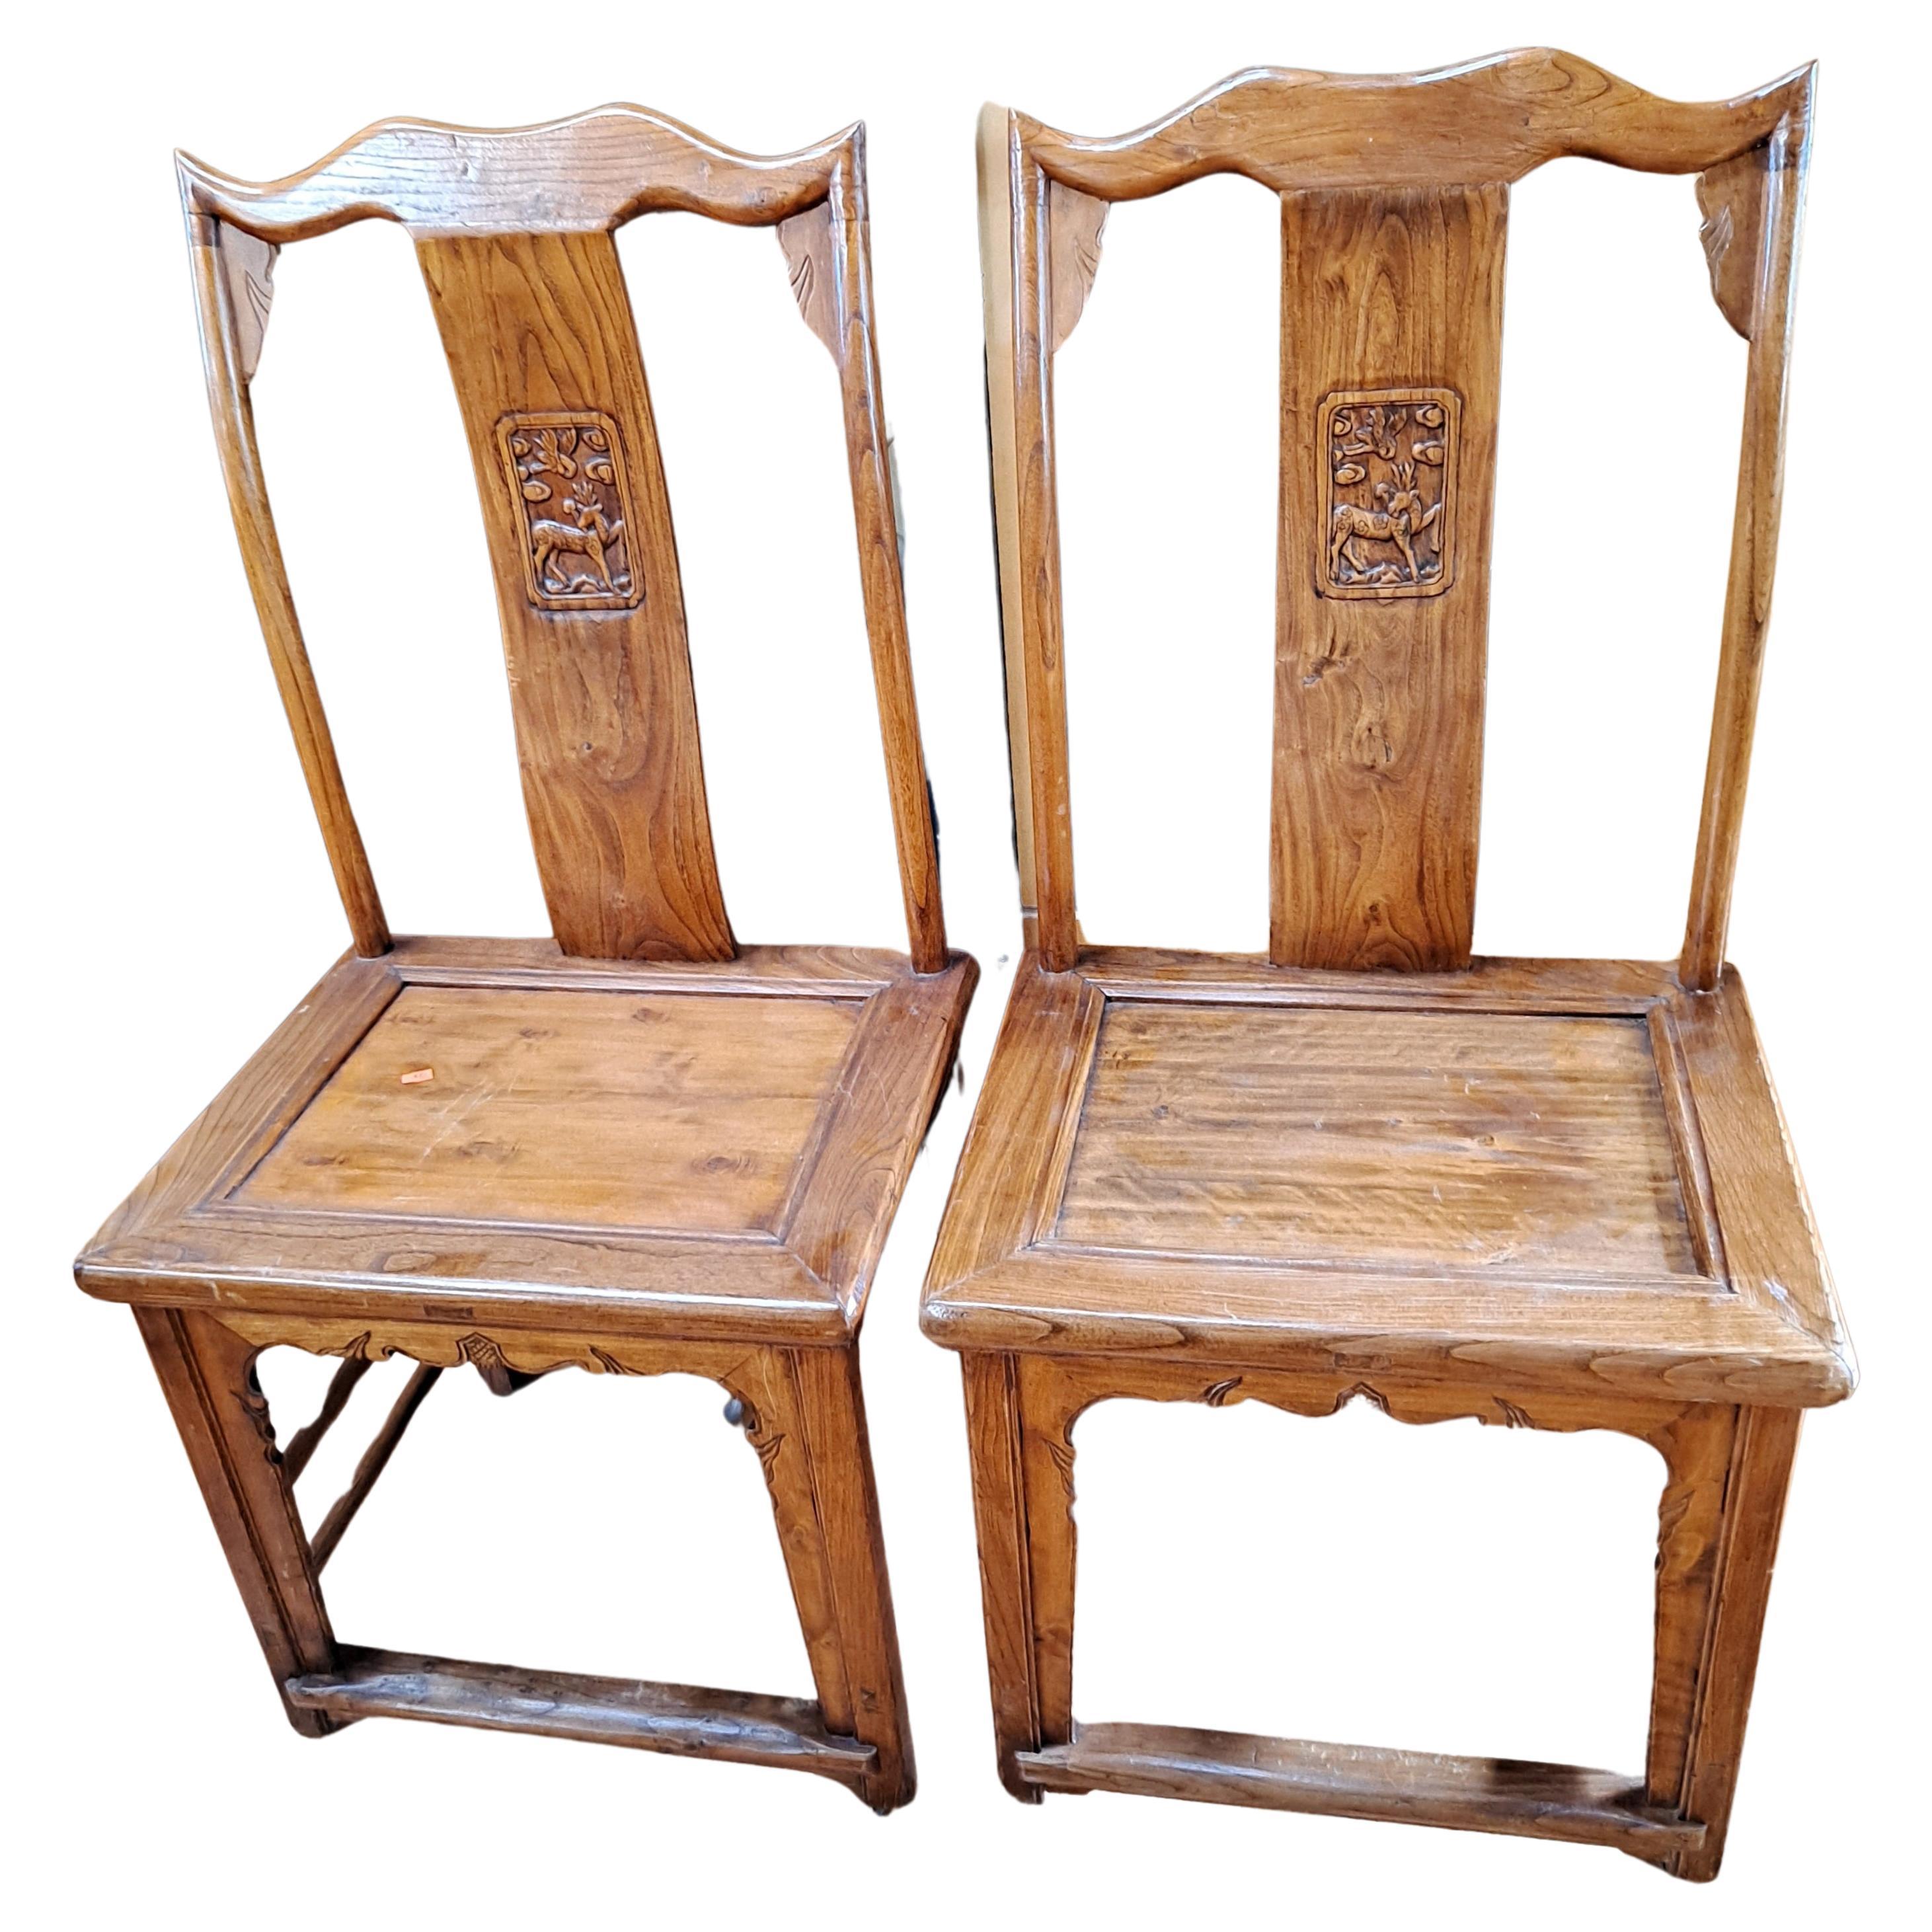 Pair of Chinese Elmwood Yoke High Back Ming Style Chairs